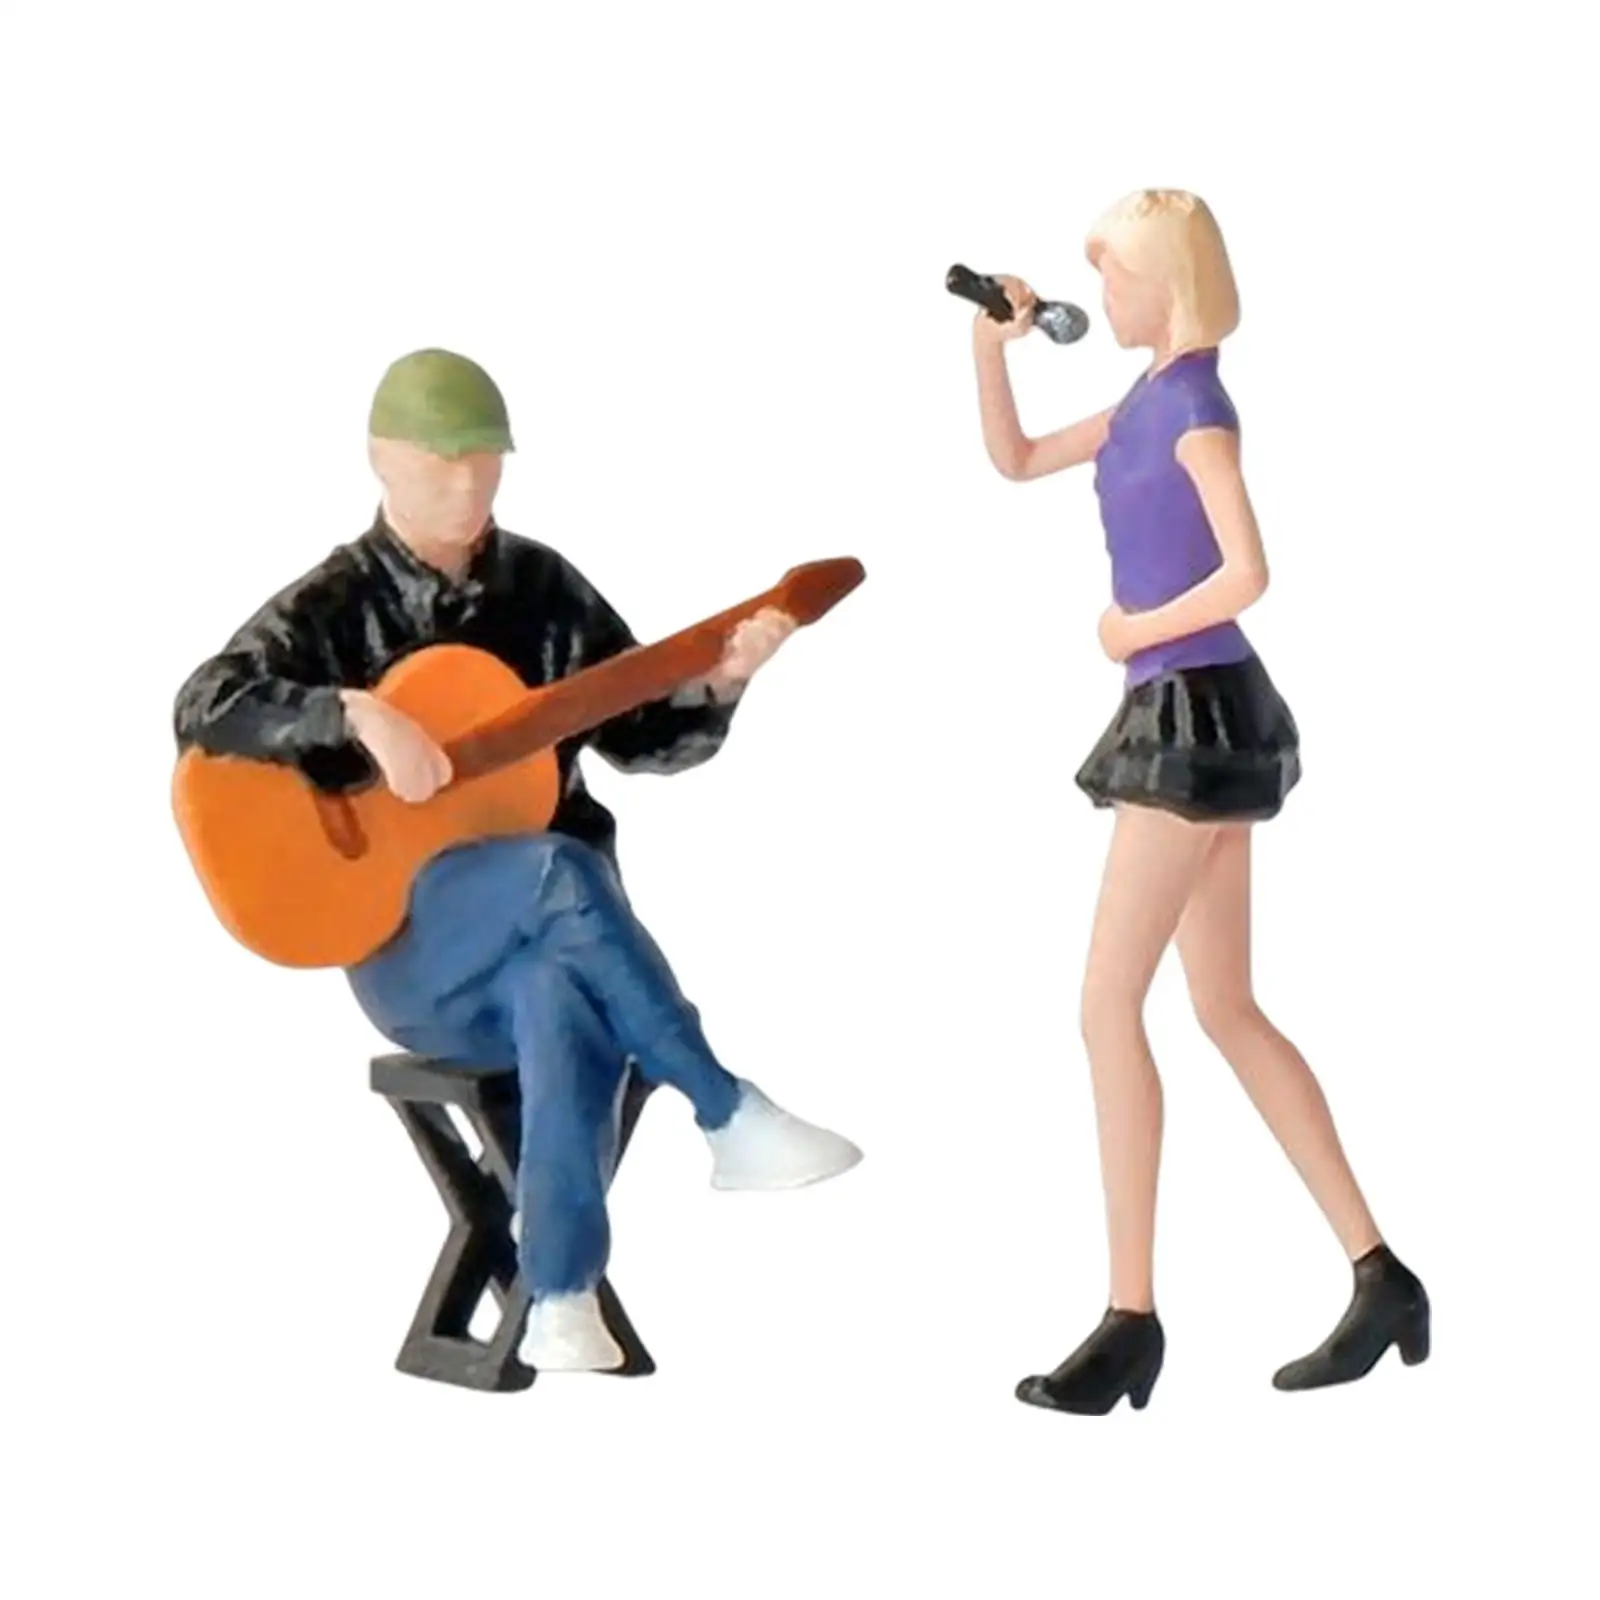 1/64 Figure Diorama Street Character Street Singer Model DIY Micro Landscapes Mini for Dollhouse Accessories Decoration Layout